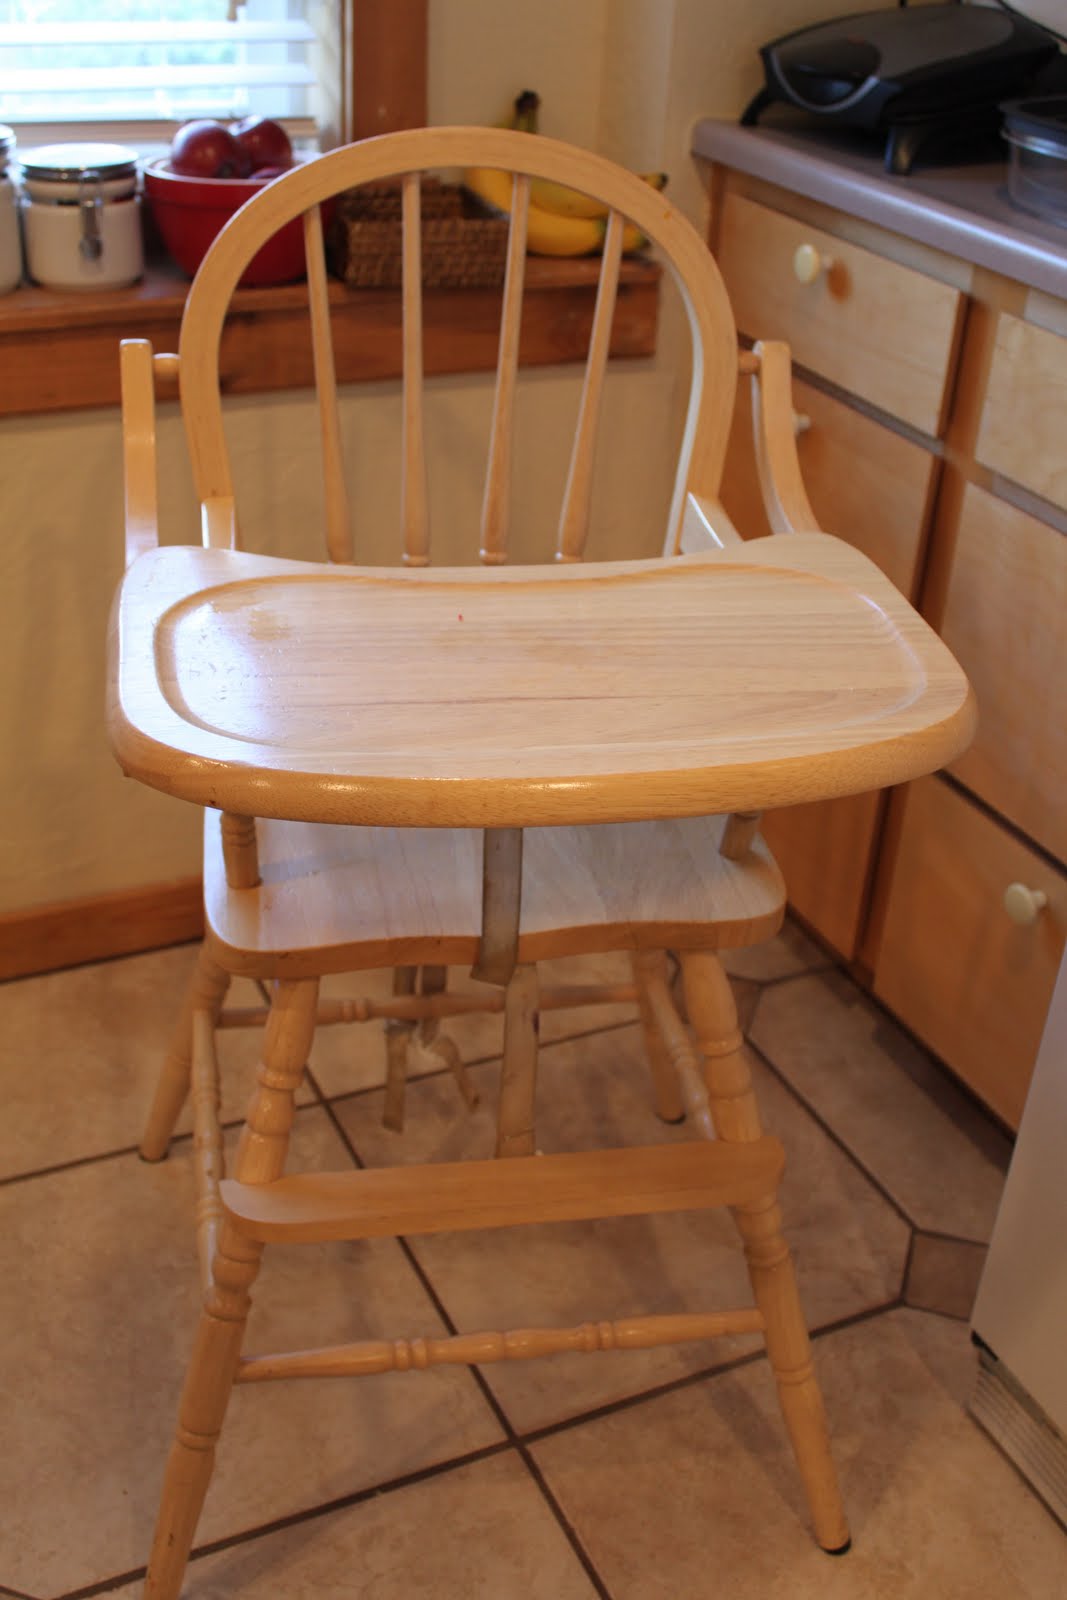 Woodwork How To Build A Wooden High Chair Plans PDF Plans